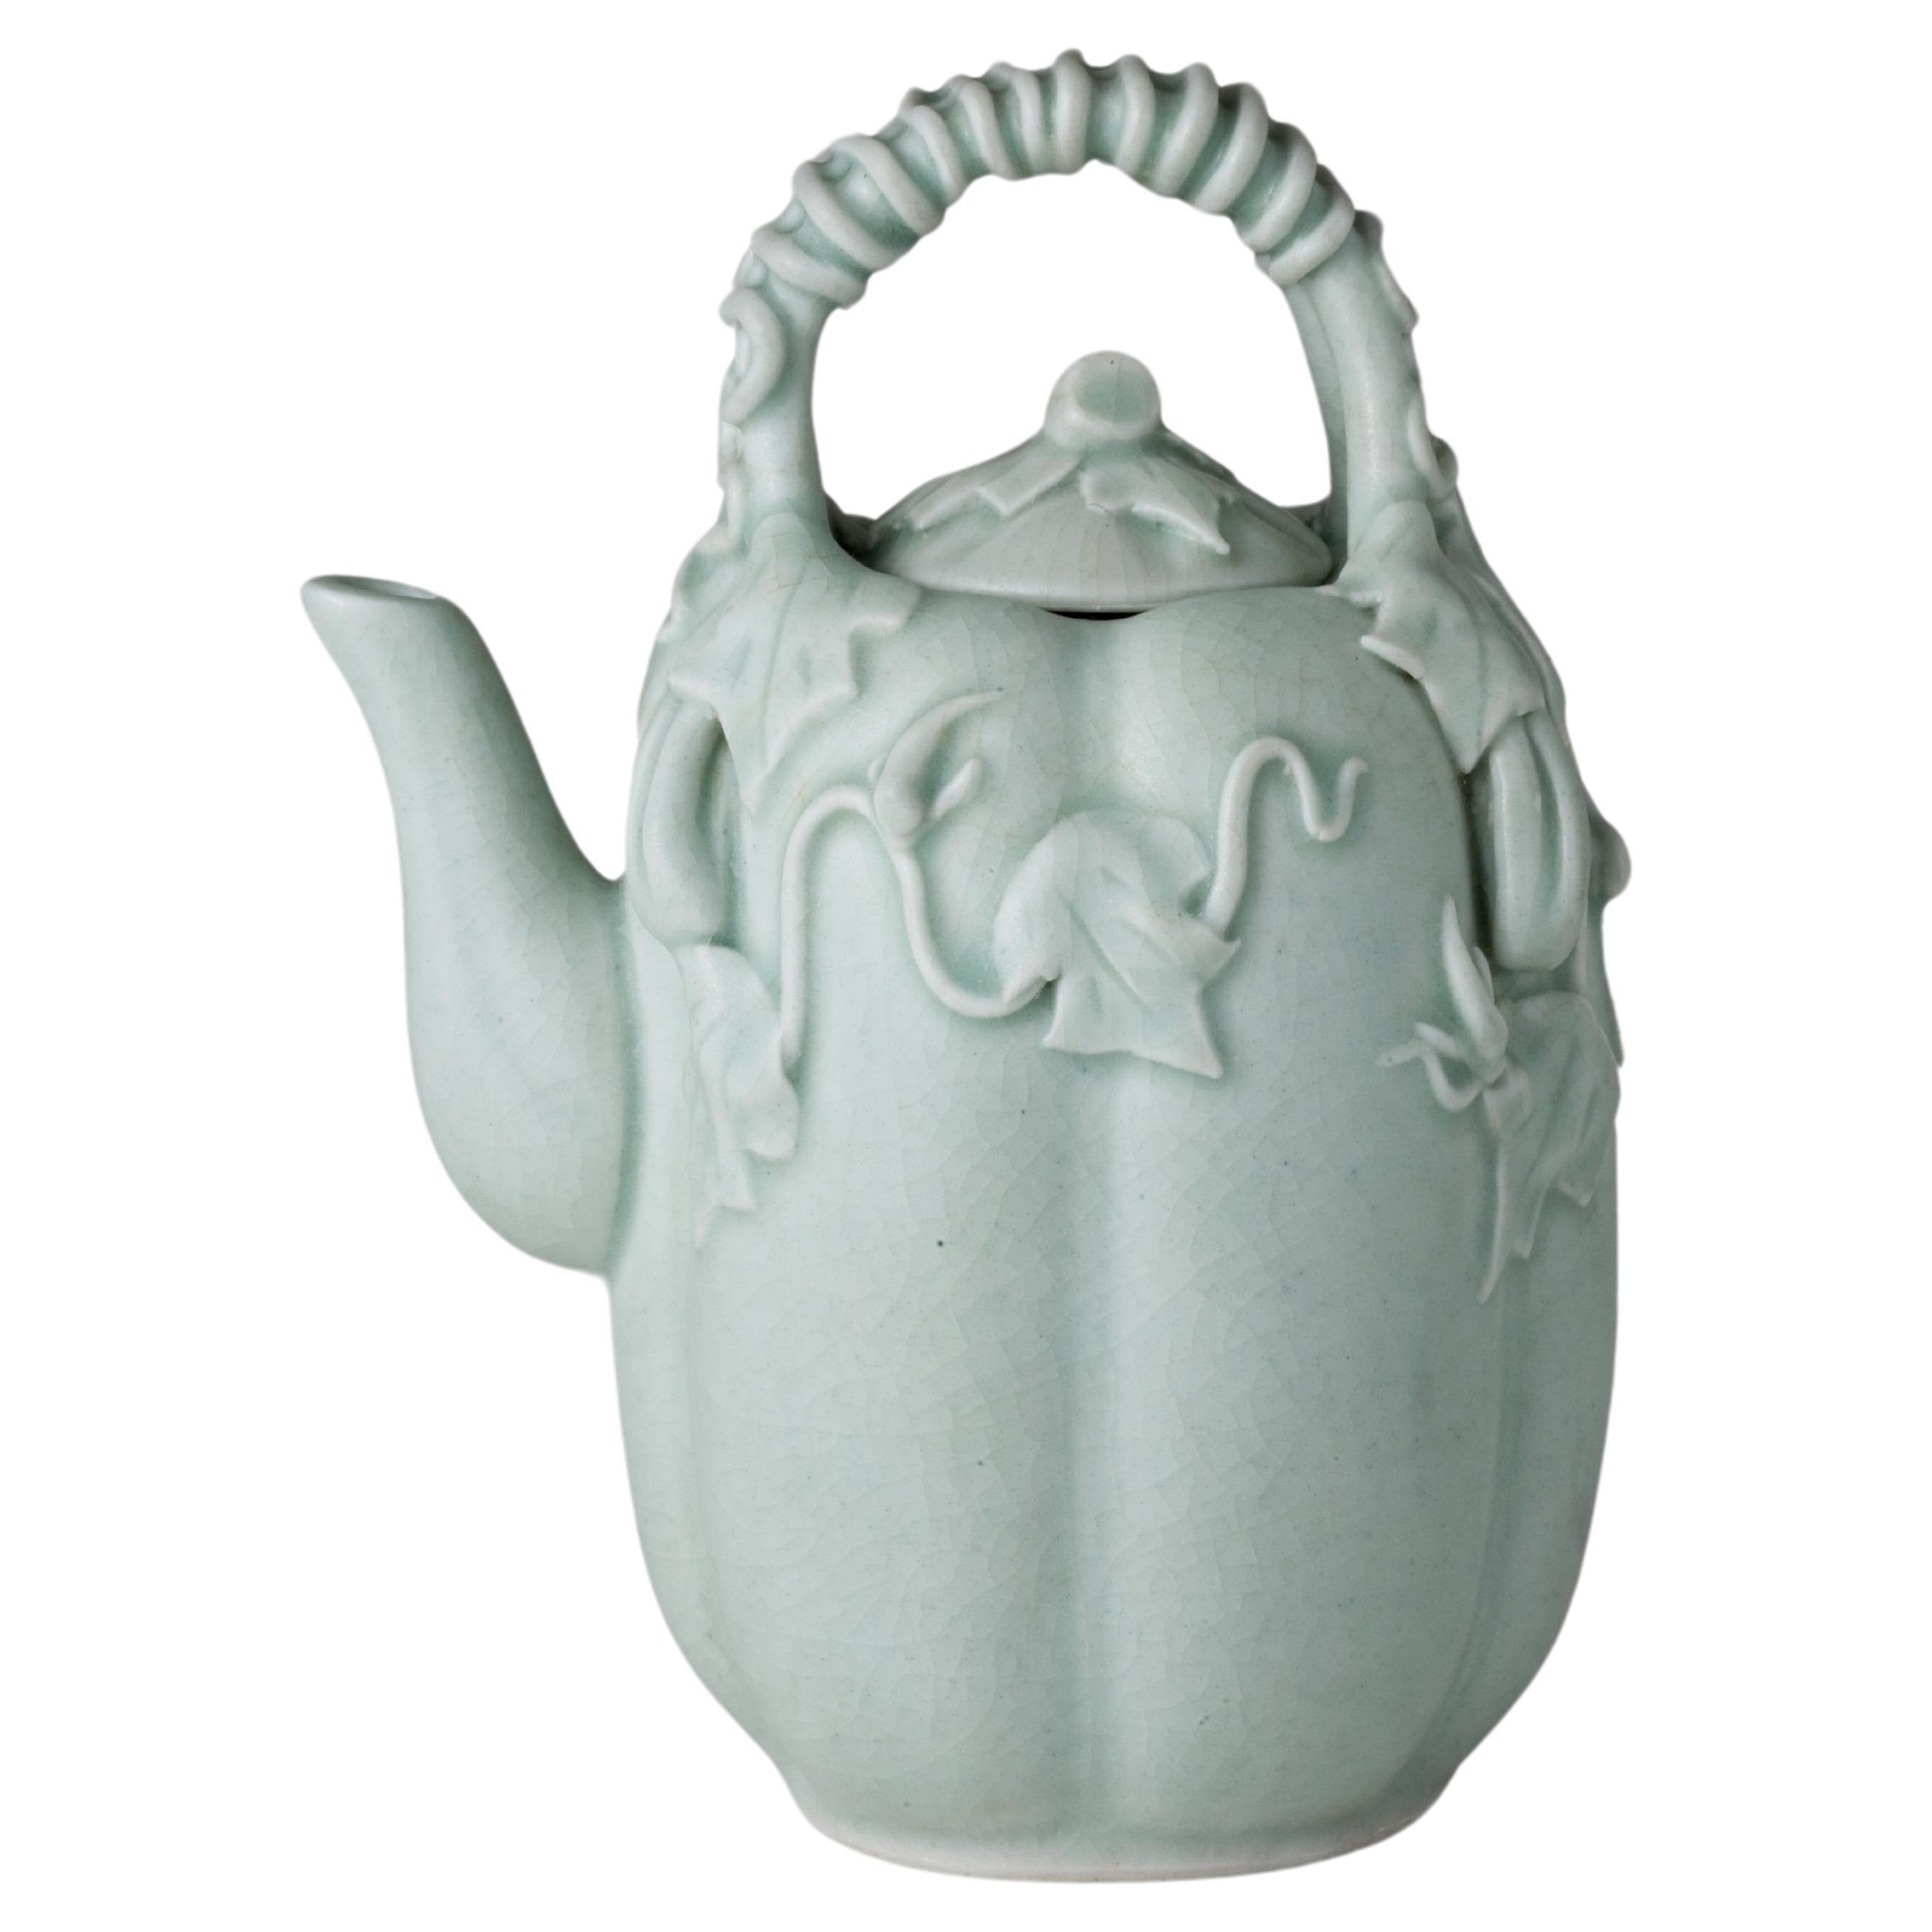 Qingbai ewer with vine decoration, Song Dynasty